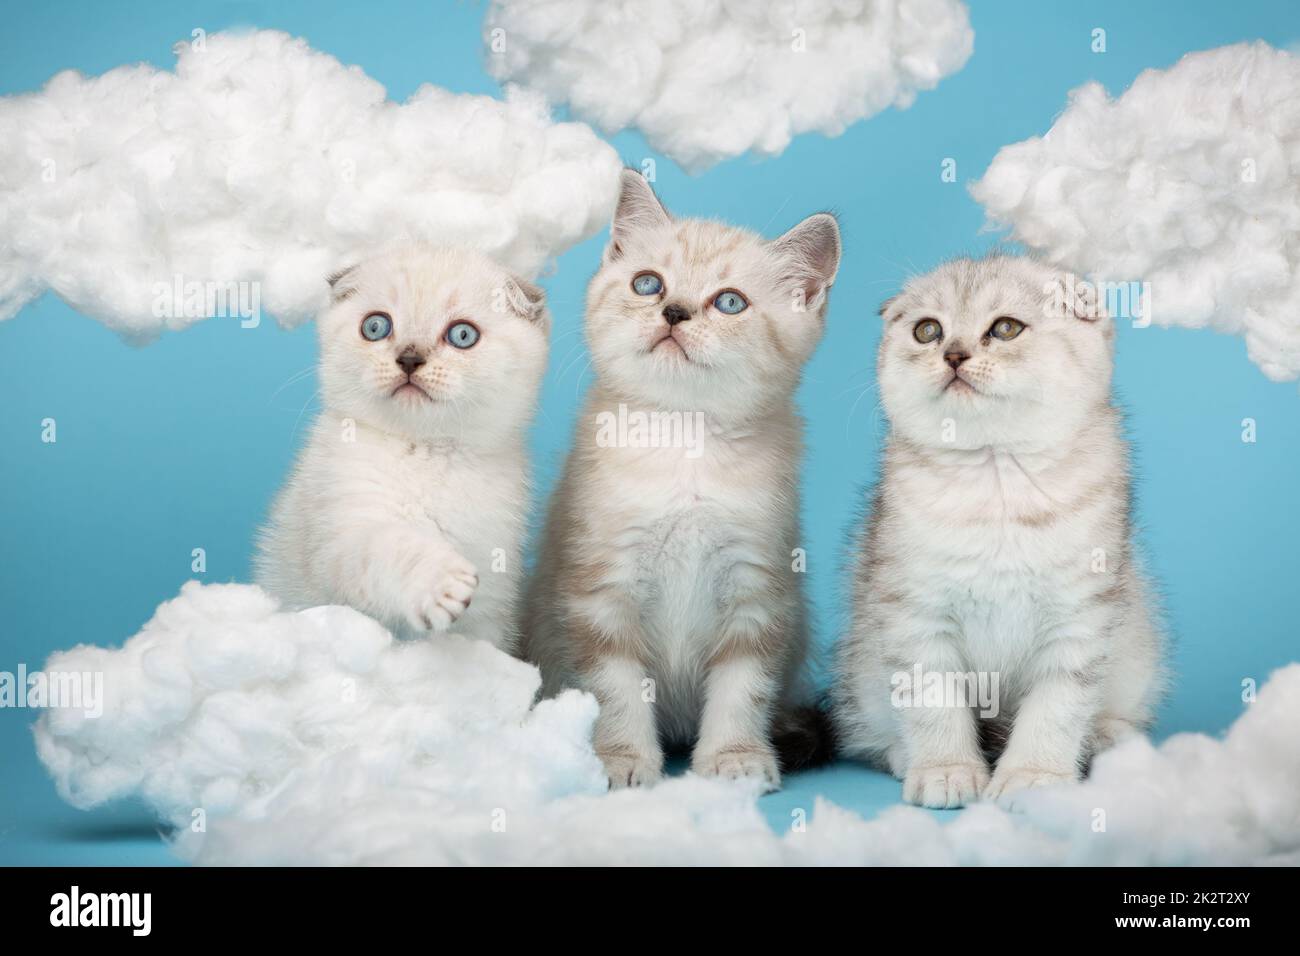 Scottish kittens raise their heads and look up against the sky with white fluffy clouds. Stock Photo